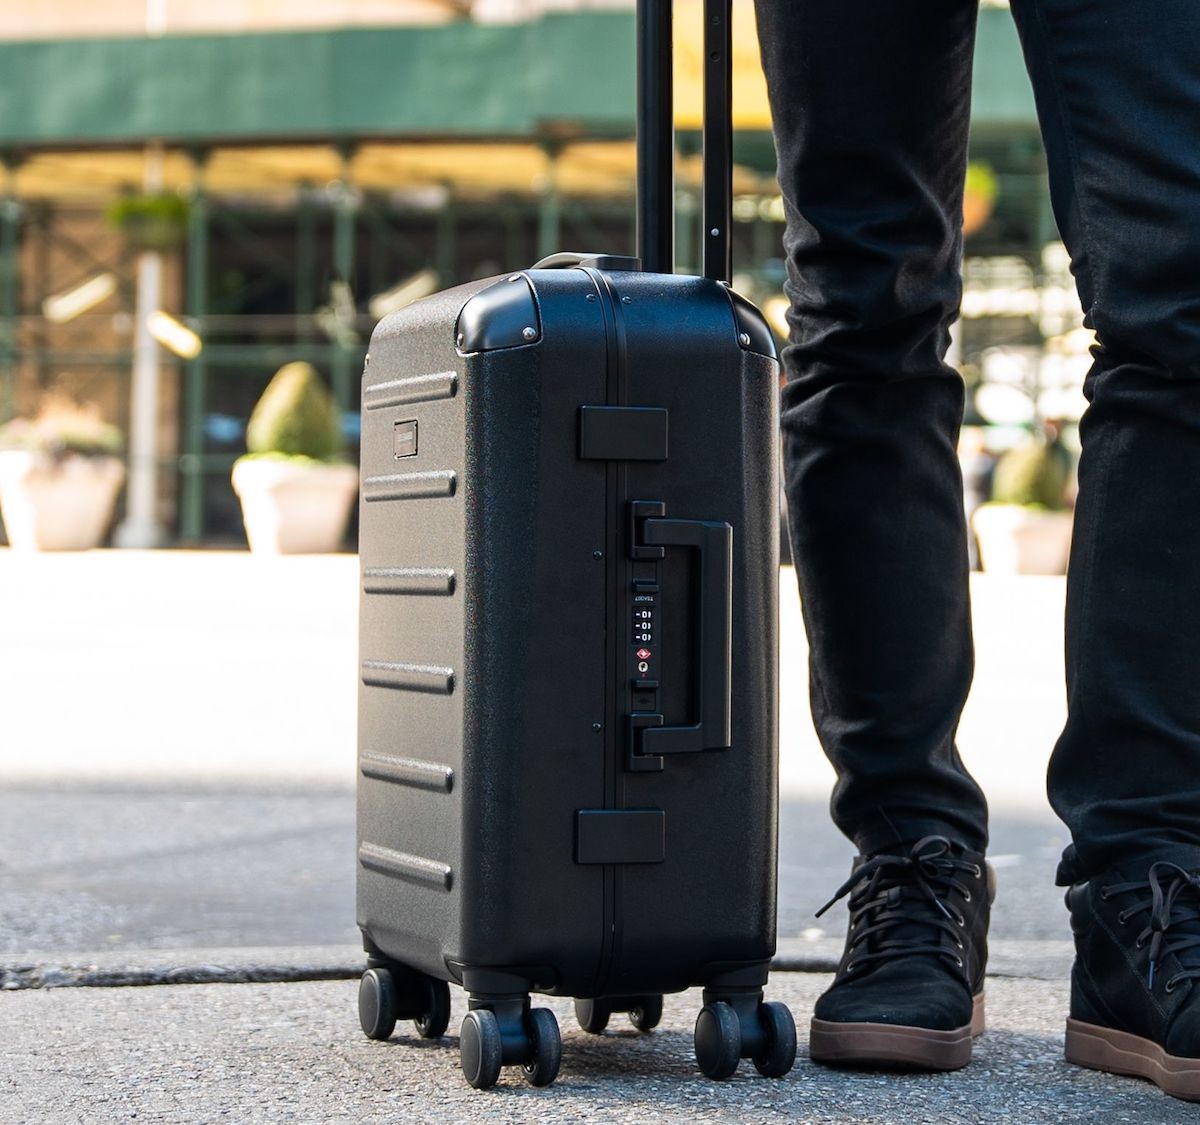 Solgaard Carry-On Closet 2.0 Domestic Premium Suitcase keeps all your clothing organized